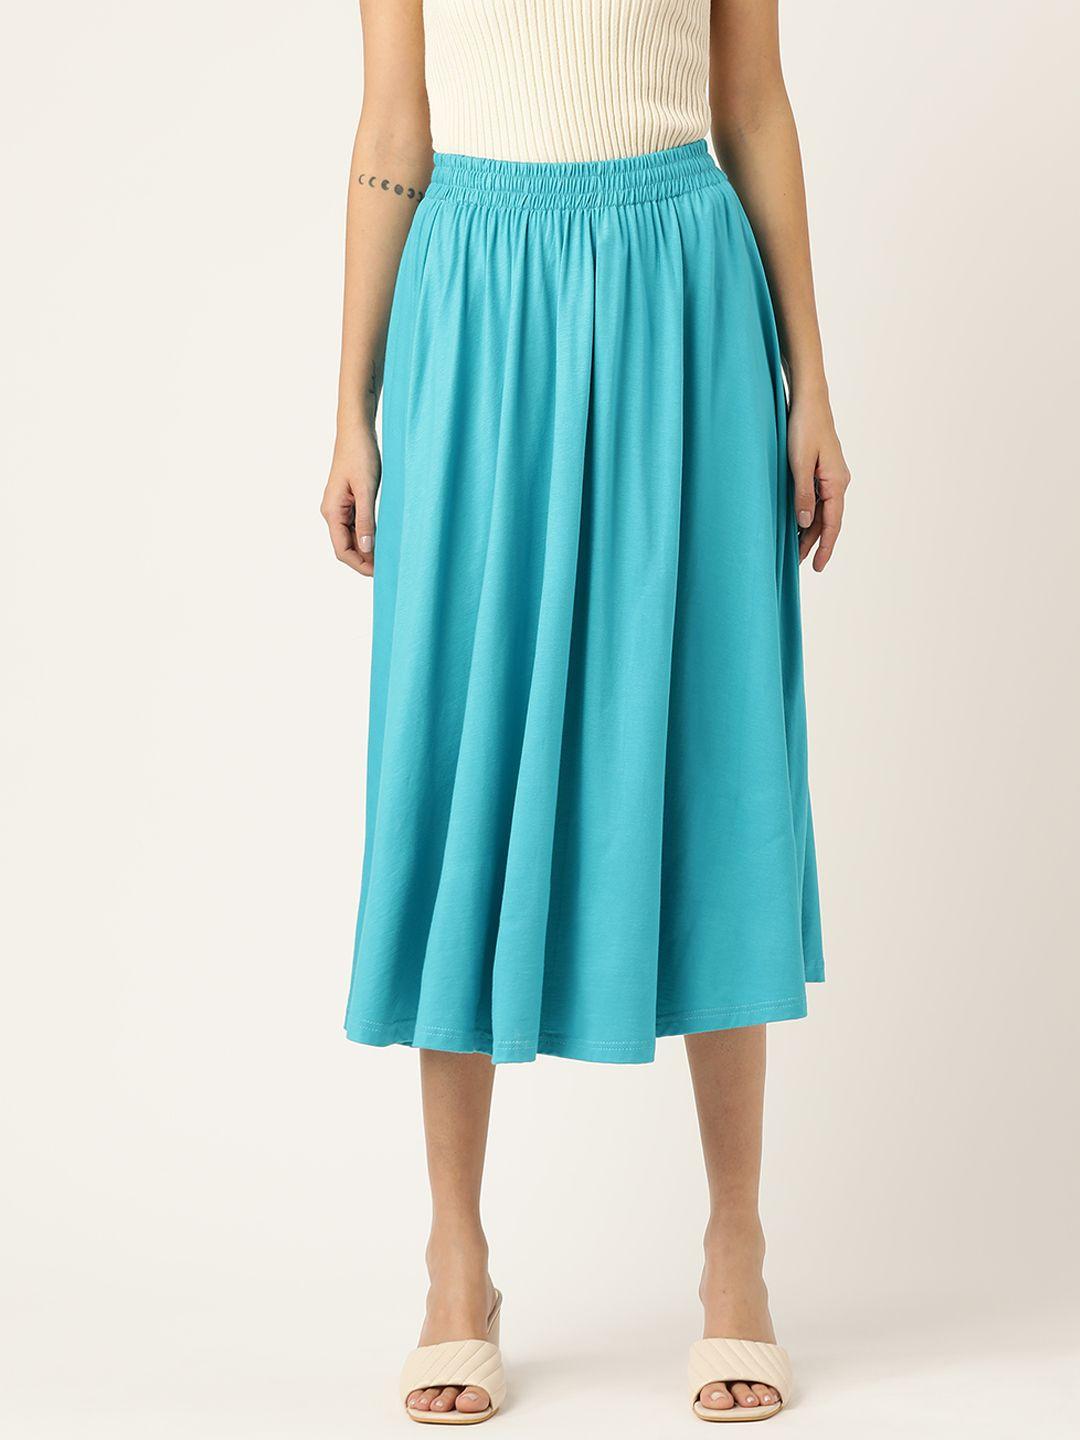 brinns women turquoise blue solid a-line skirt